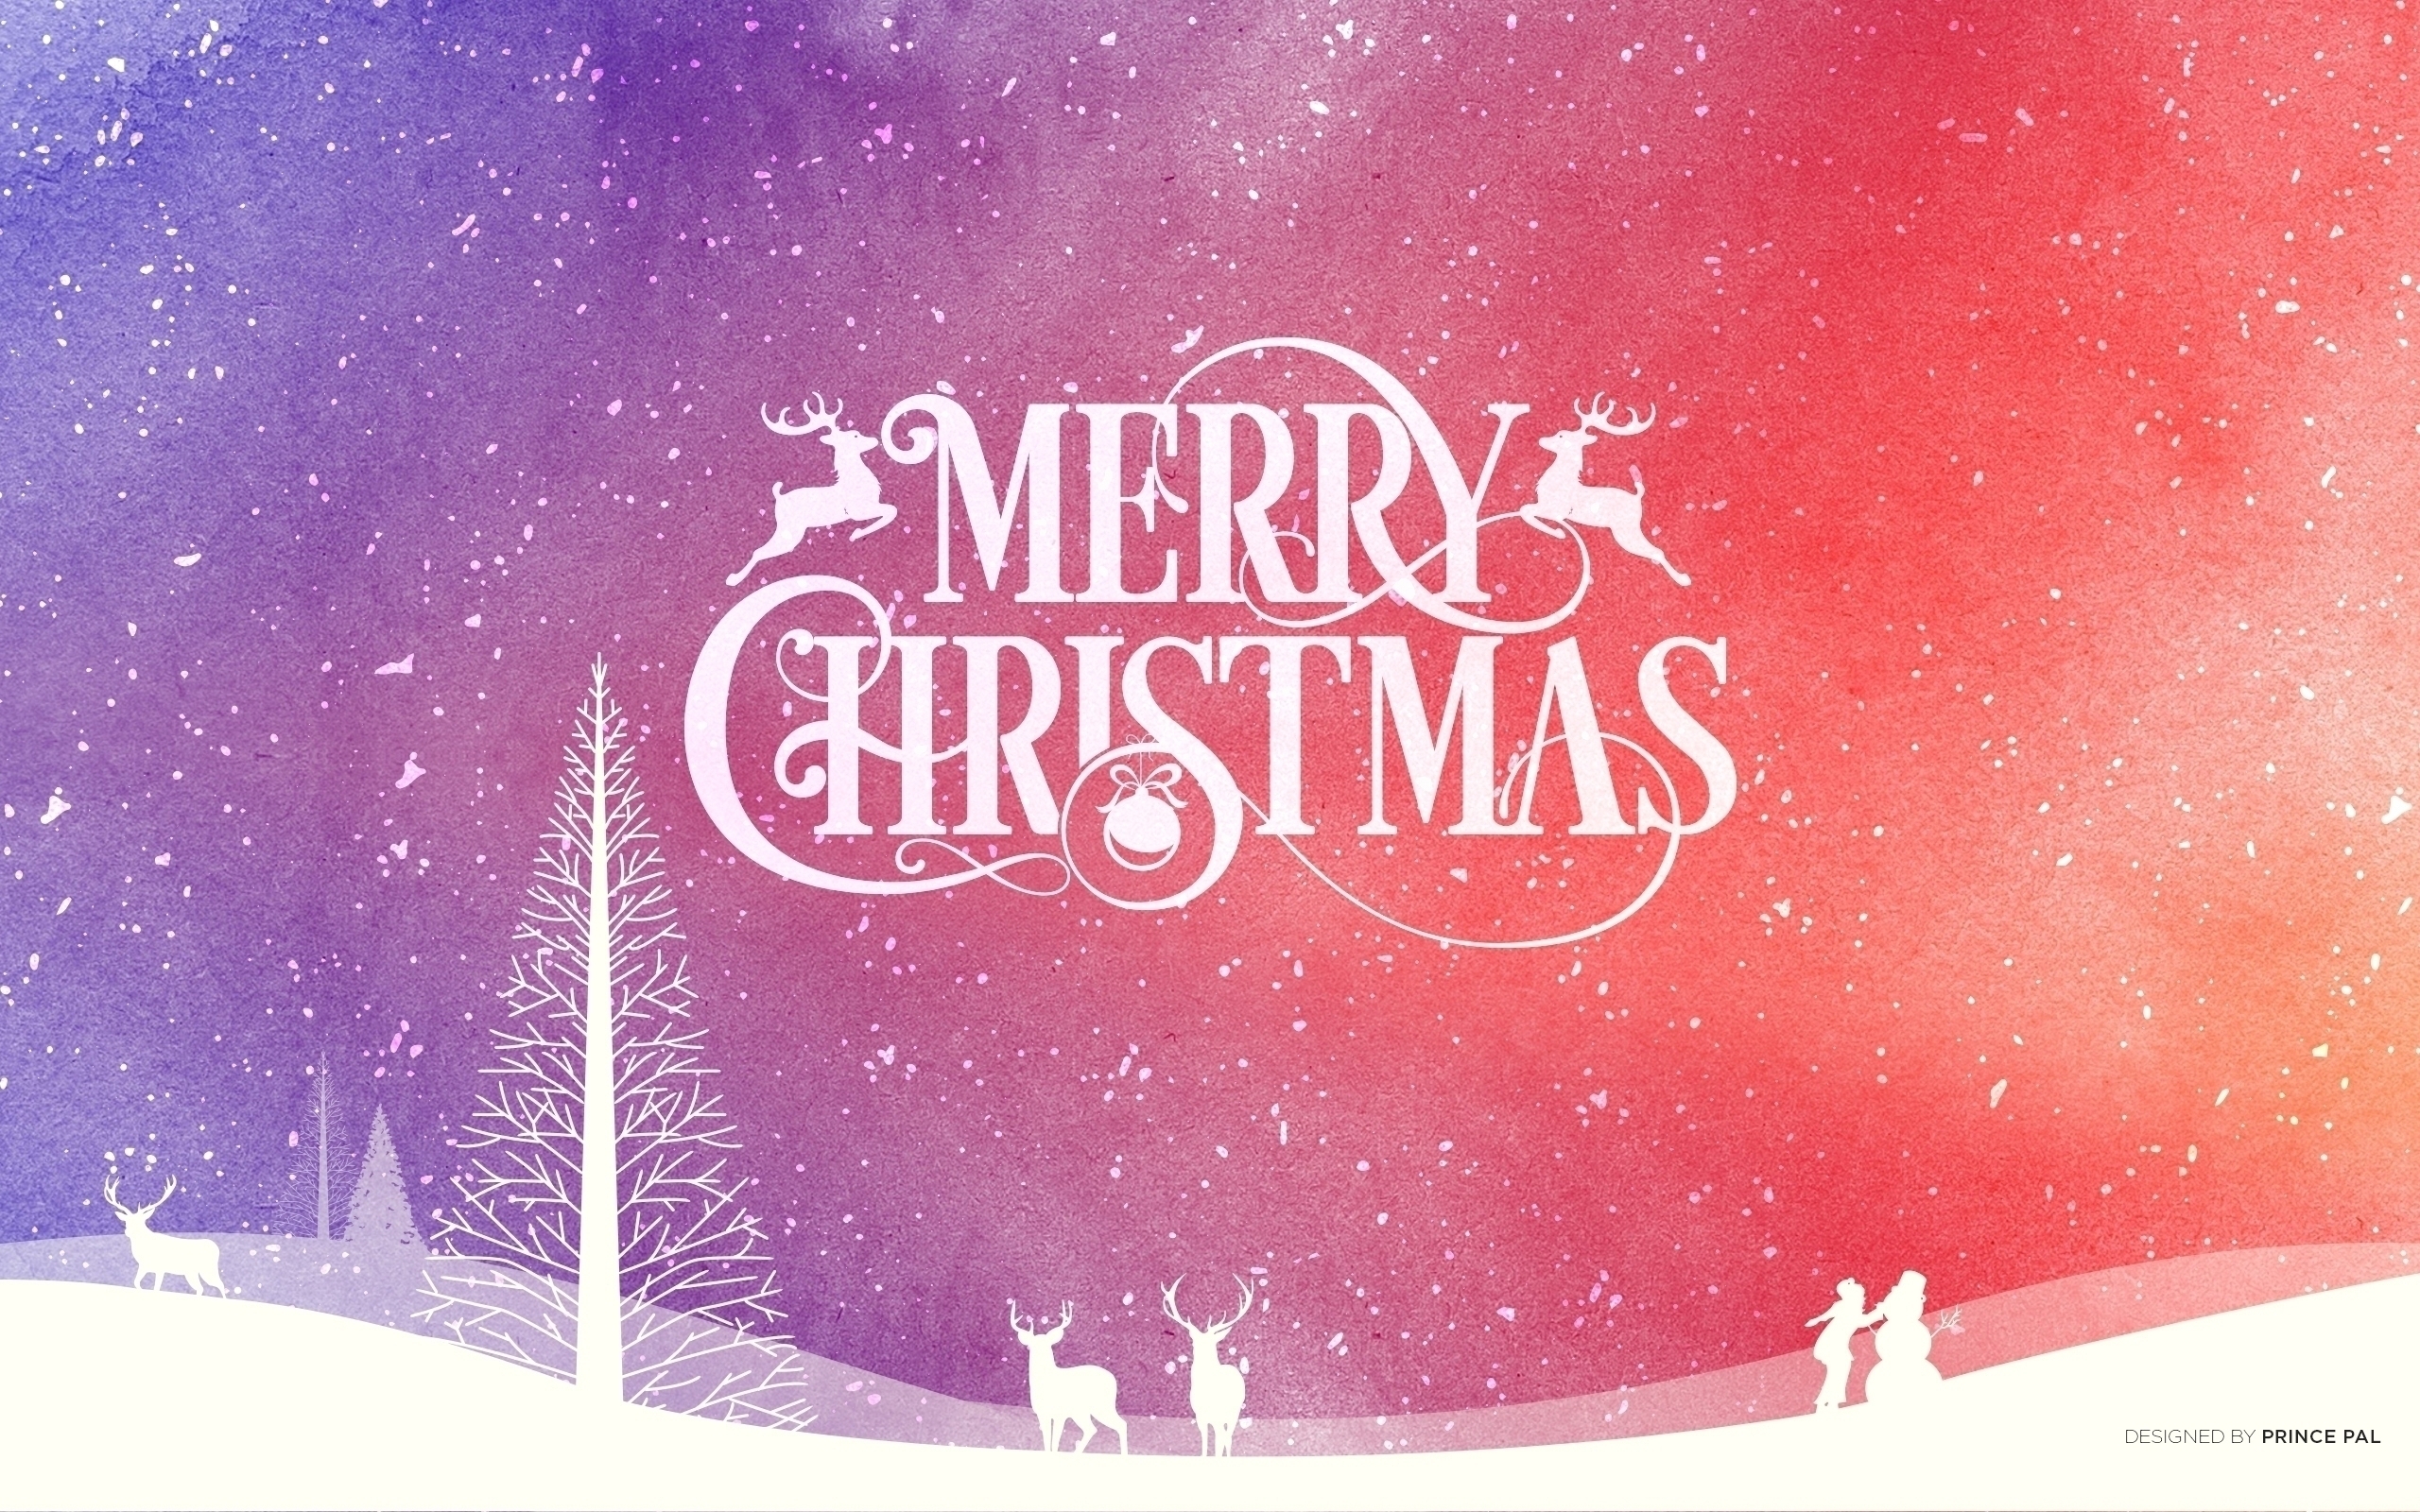 Merry Christmas 2016 Wallpapers